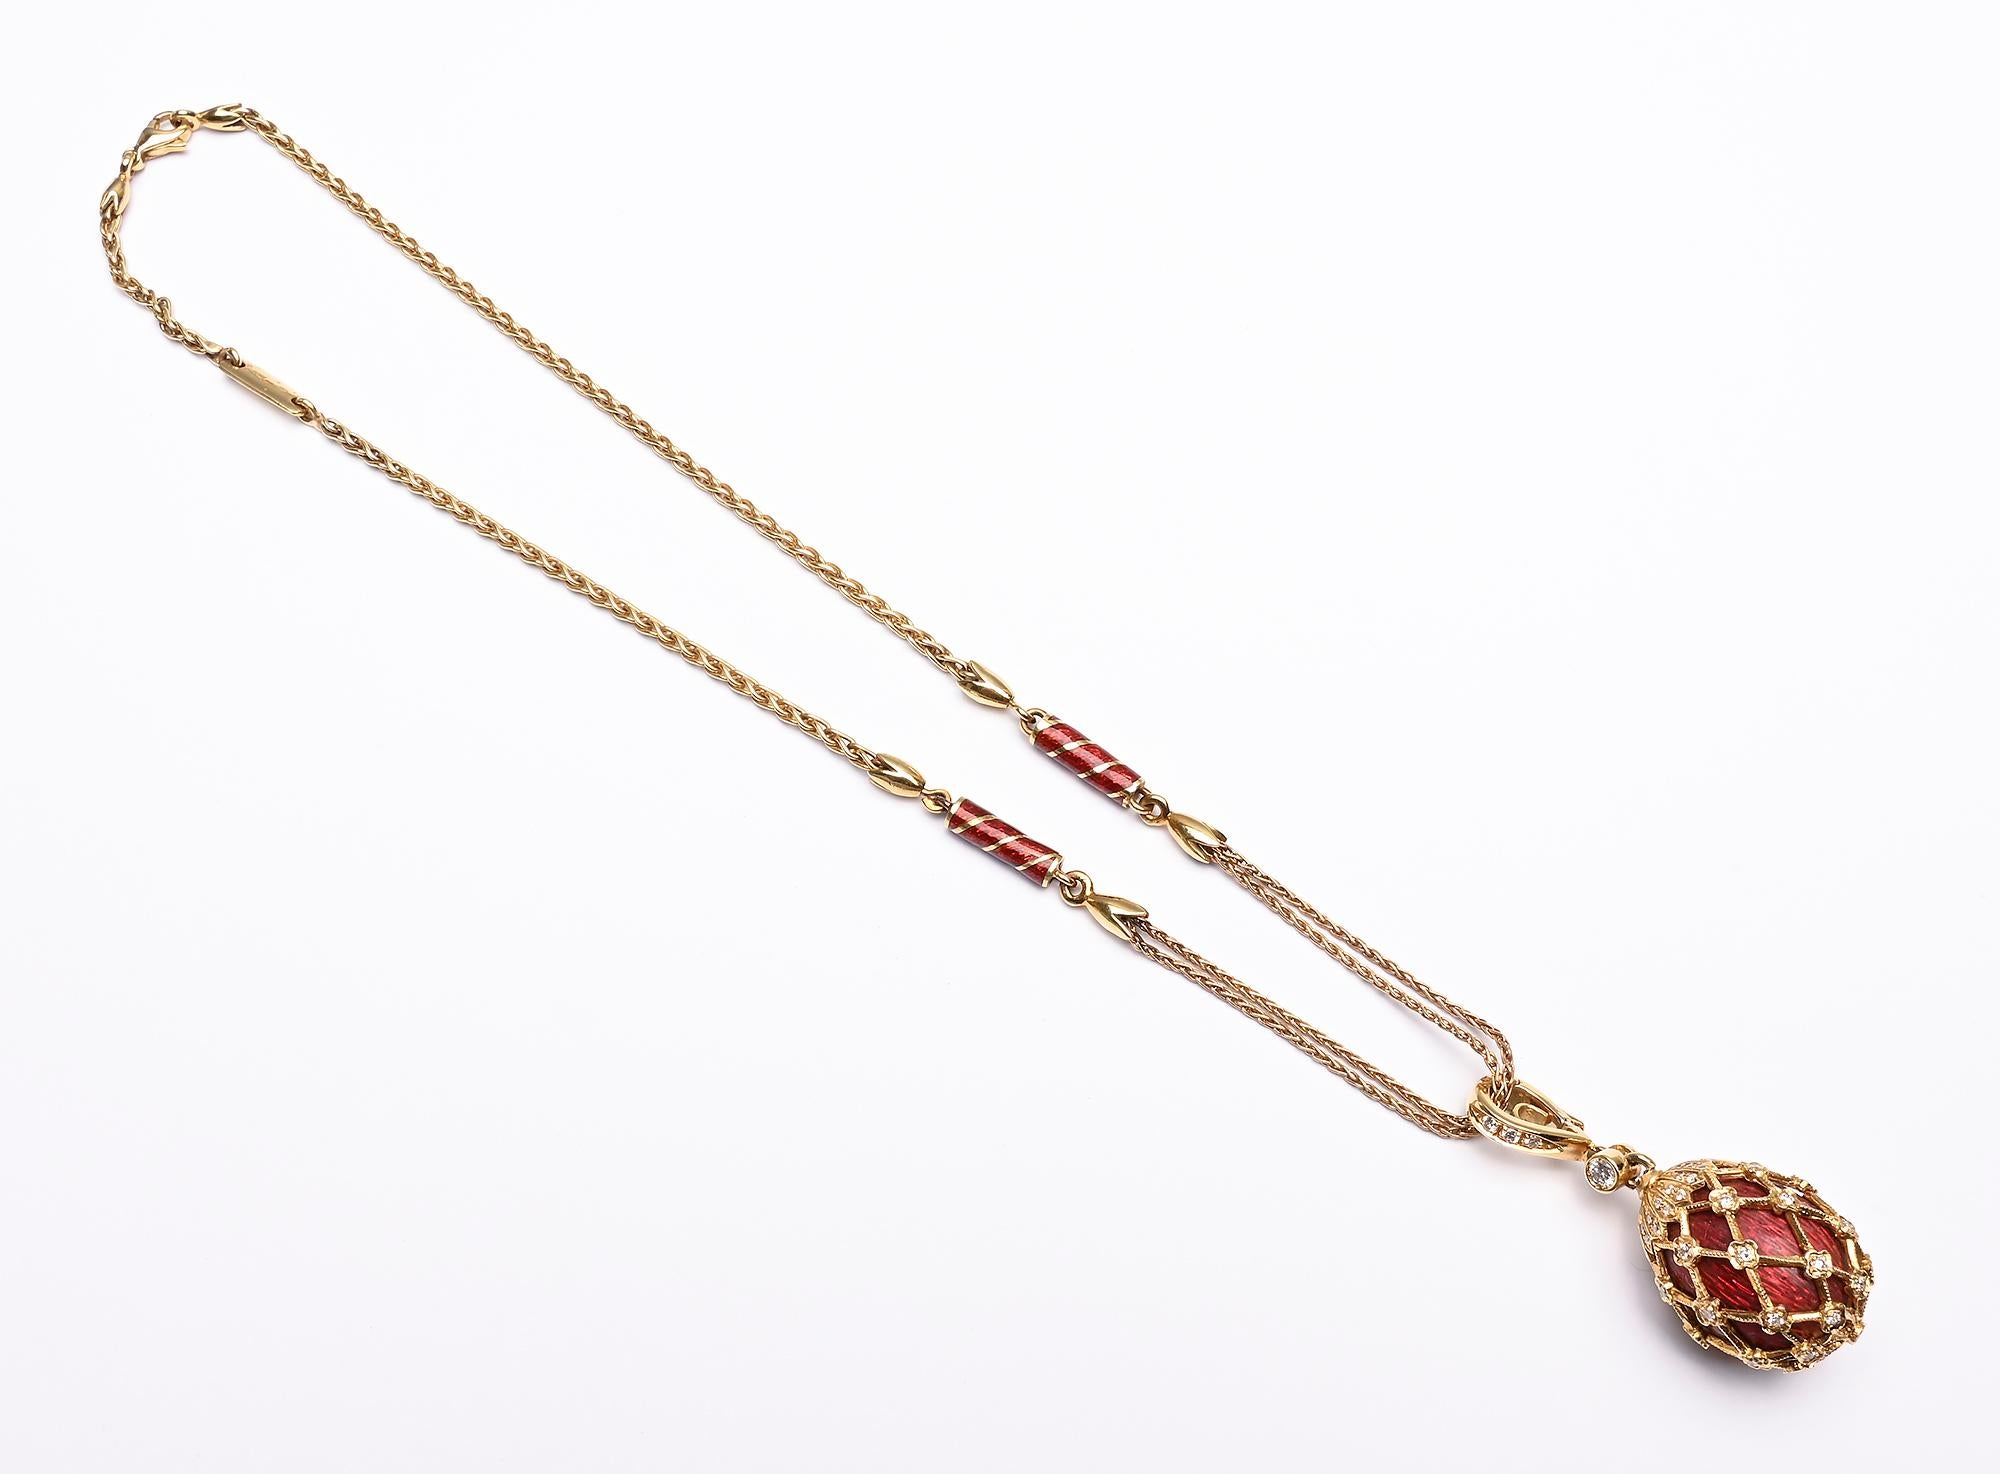 Versatile and unusual necklace that can be worn two different ways. The egg shaped pendant can be suspended from the gold chain or easily removed to have a gold chain with two links of enamel wrapped with gold. The chain is 15 inches long.
The